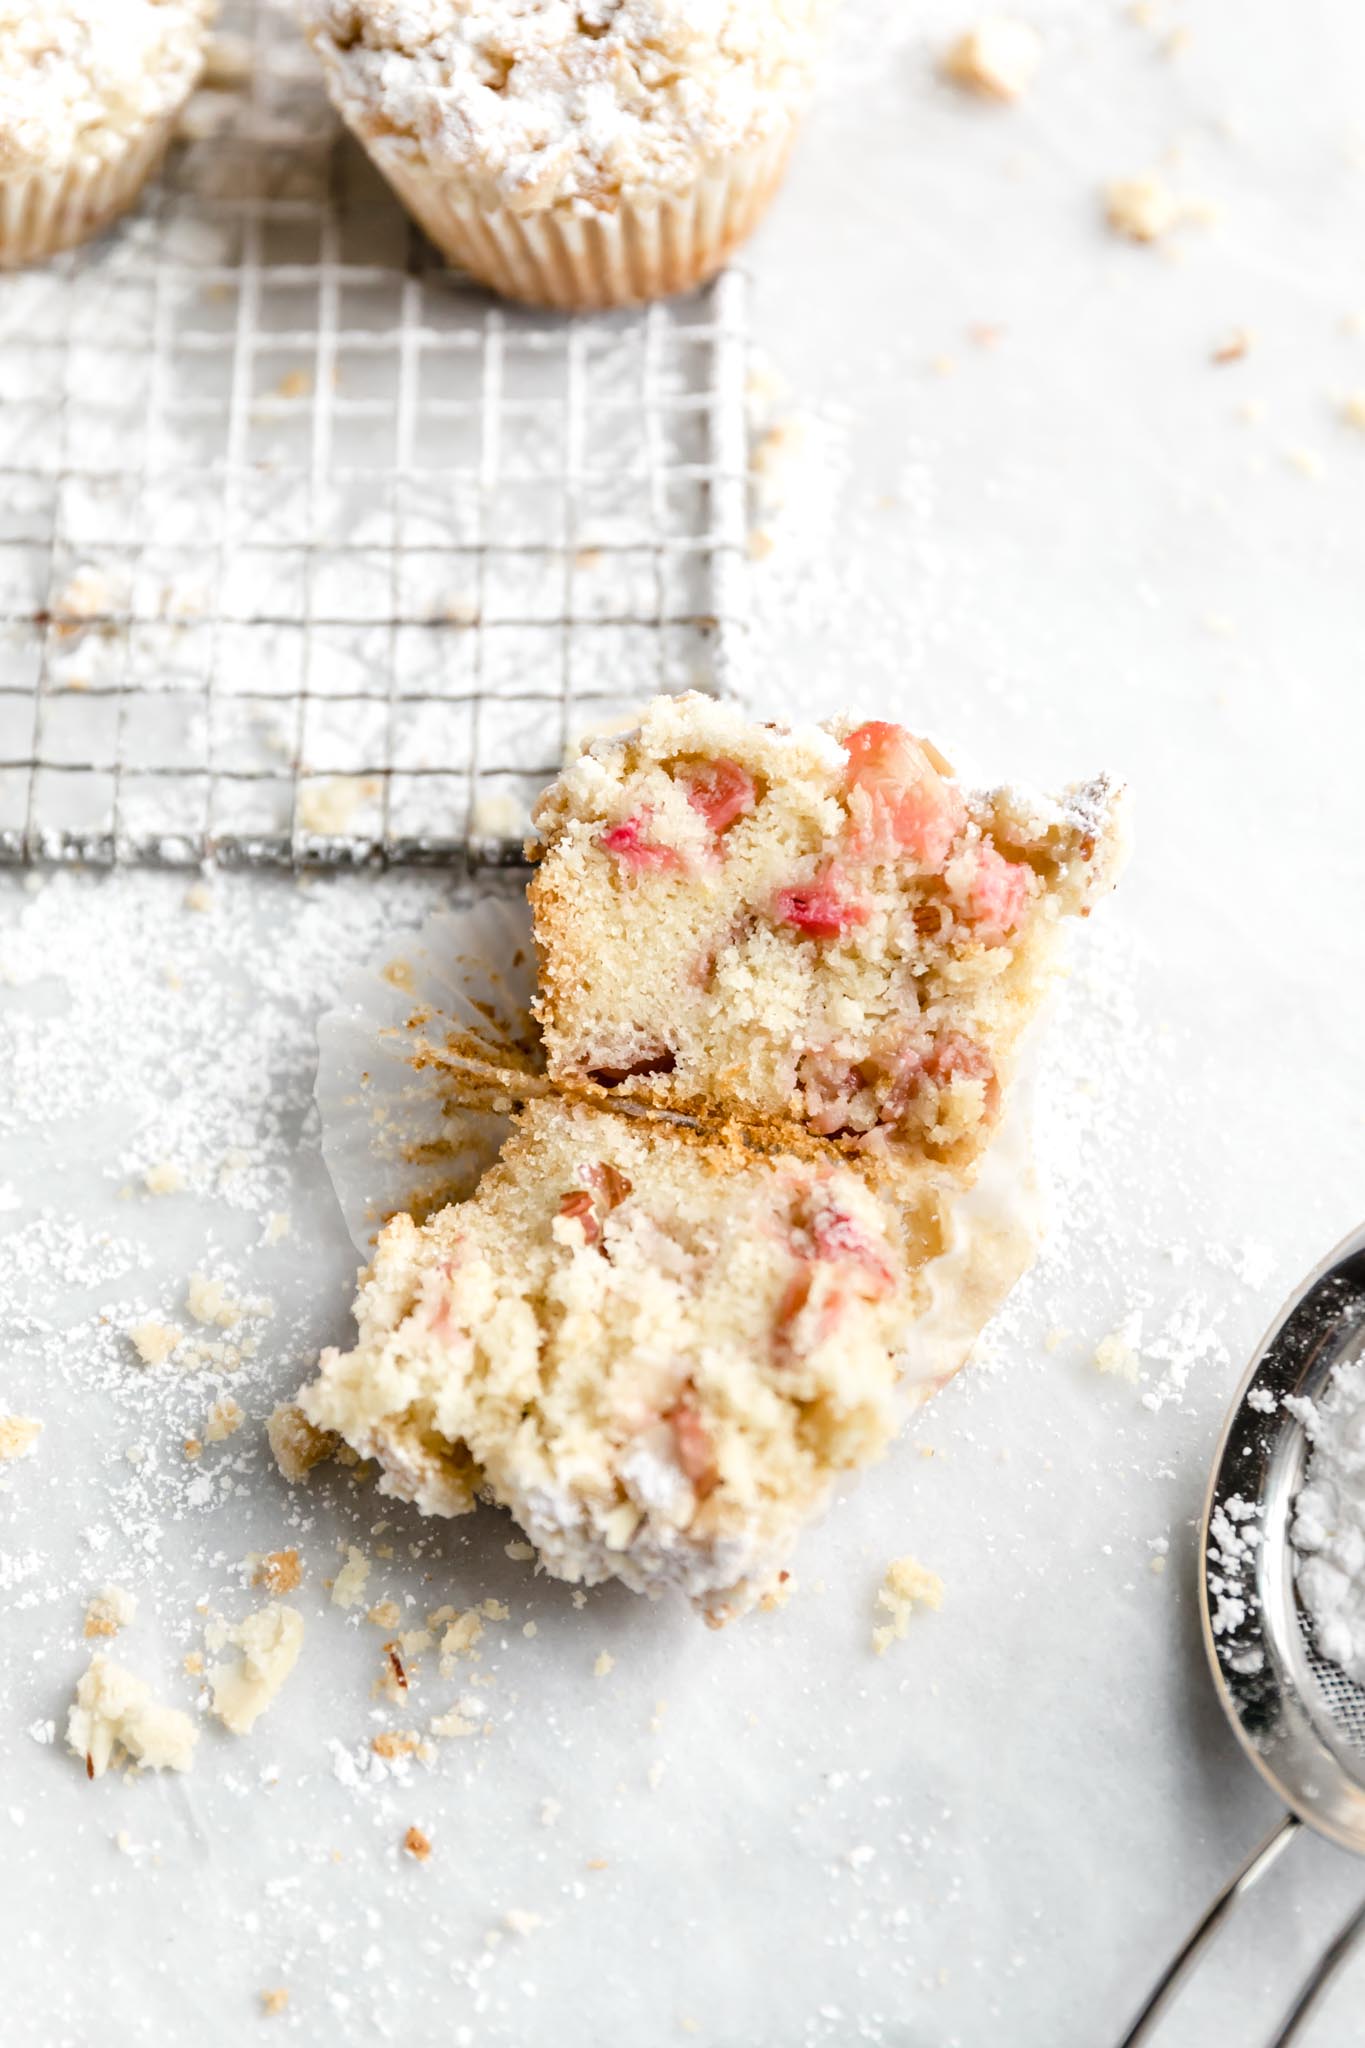 Looking for your new favorite spring muffin recipe? We gotcha covered. These Almond rhubarb muffins are tender, moist and packed with chunks of rhubarb. YUM